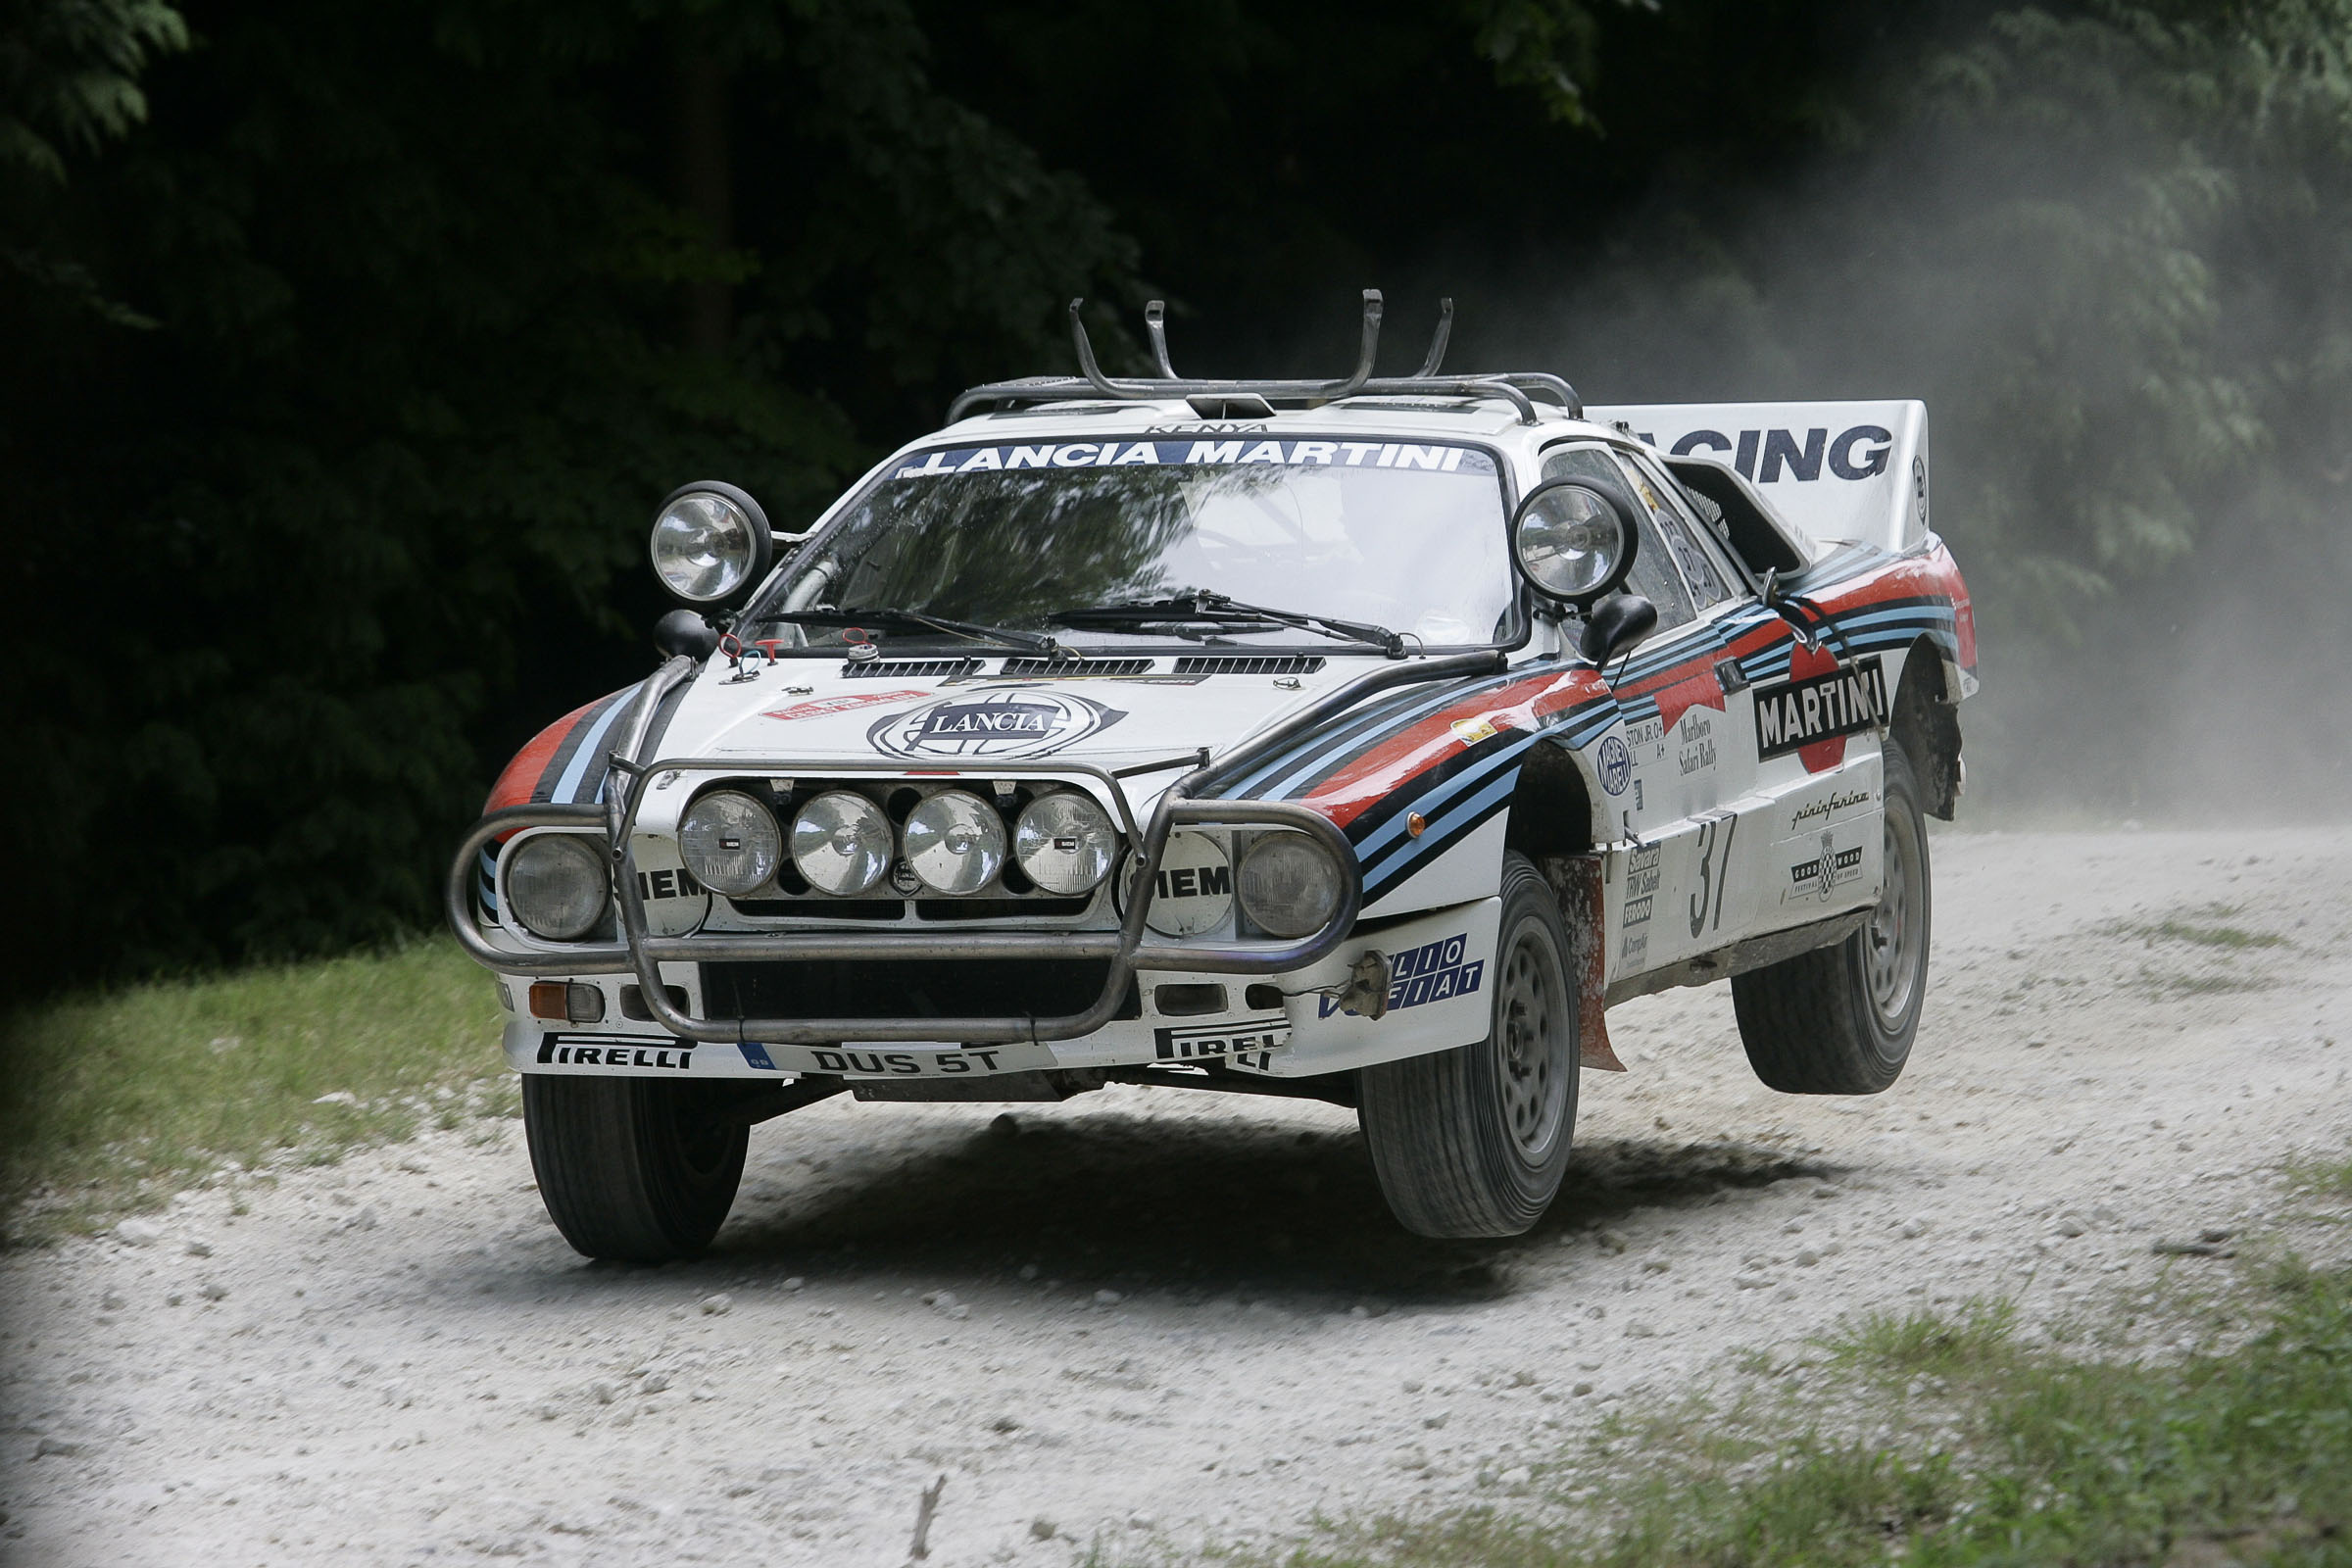 Lancia 037 wallpapers, High-quality images, 2400x1600 HD Desktop